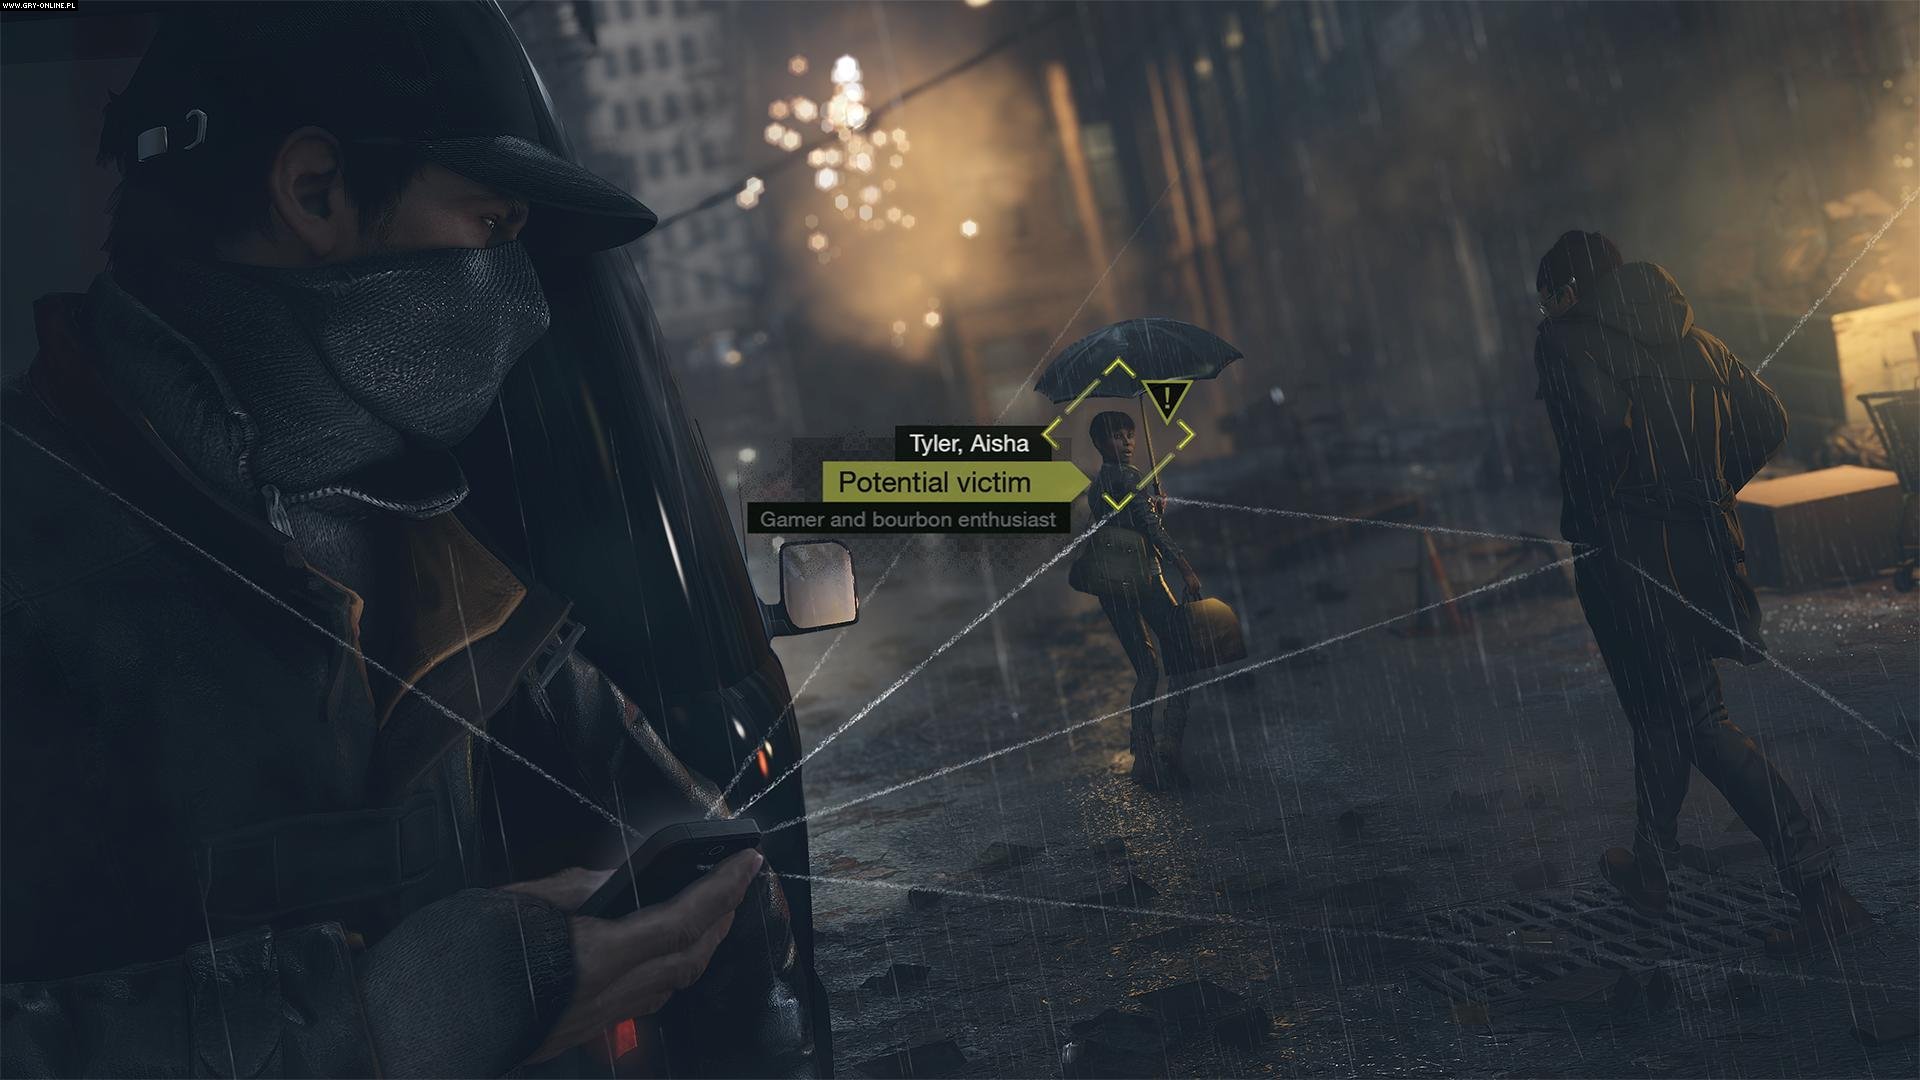 android video game, watch dogs, aiden pearce